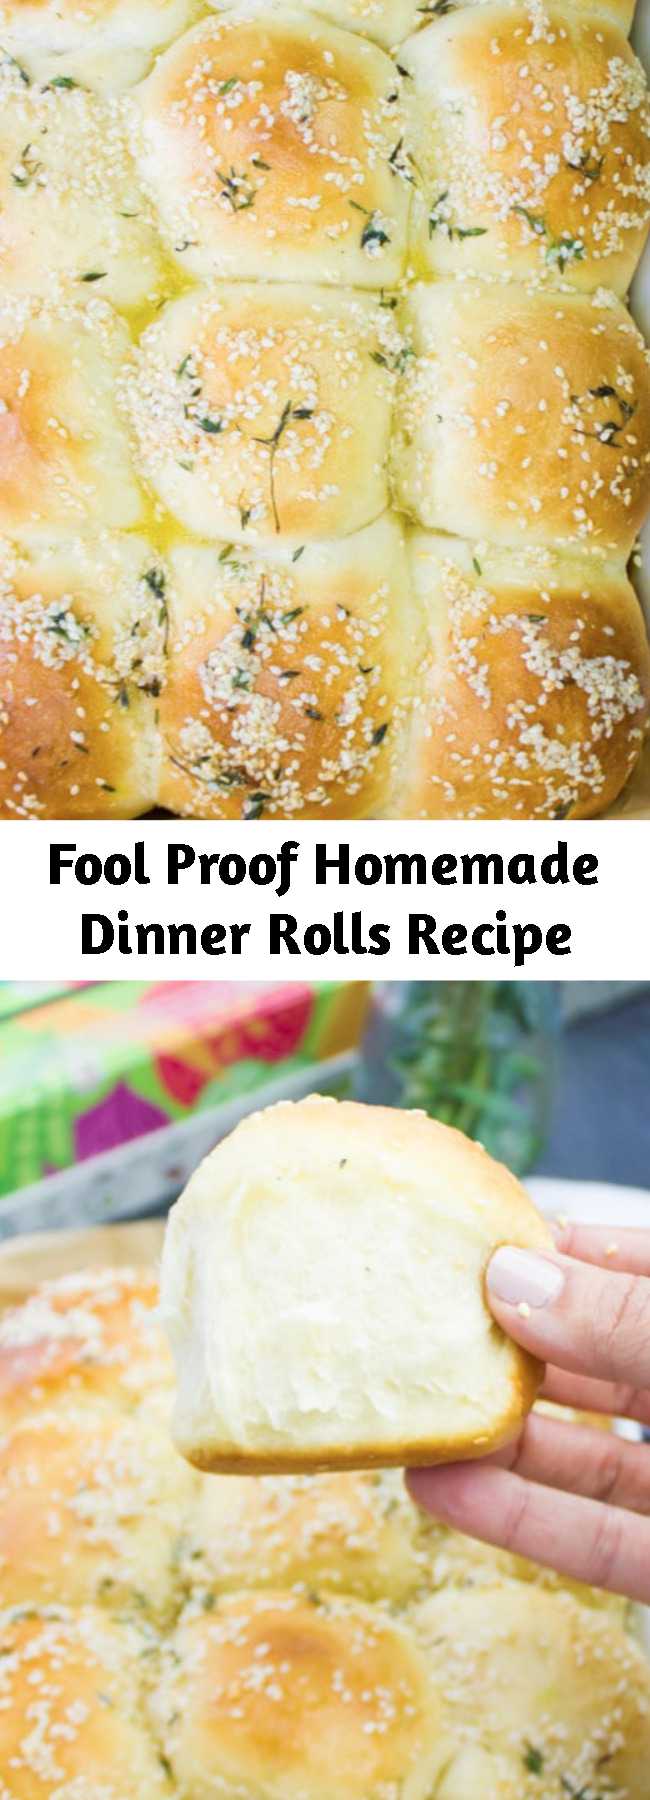 Fool Proof Homemade Dinner Rolls Recipe - These are pillowy, soft, fluffy, melt in your mouth soft dinner rolls. Light as air with a nice buttery taste--this dough is absolutely FOOL PROOF and it's a crowd pleaser every time! You can season them with different herbs, cheese, or spices to get a completely different flavor every single time! The easiest and most versatile bread dough out there!